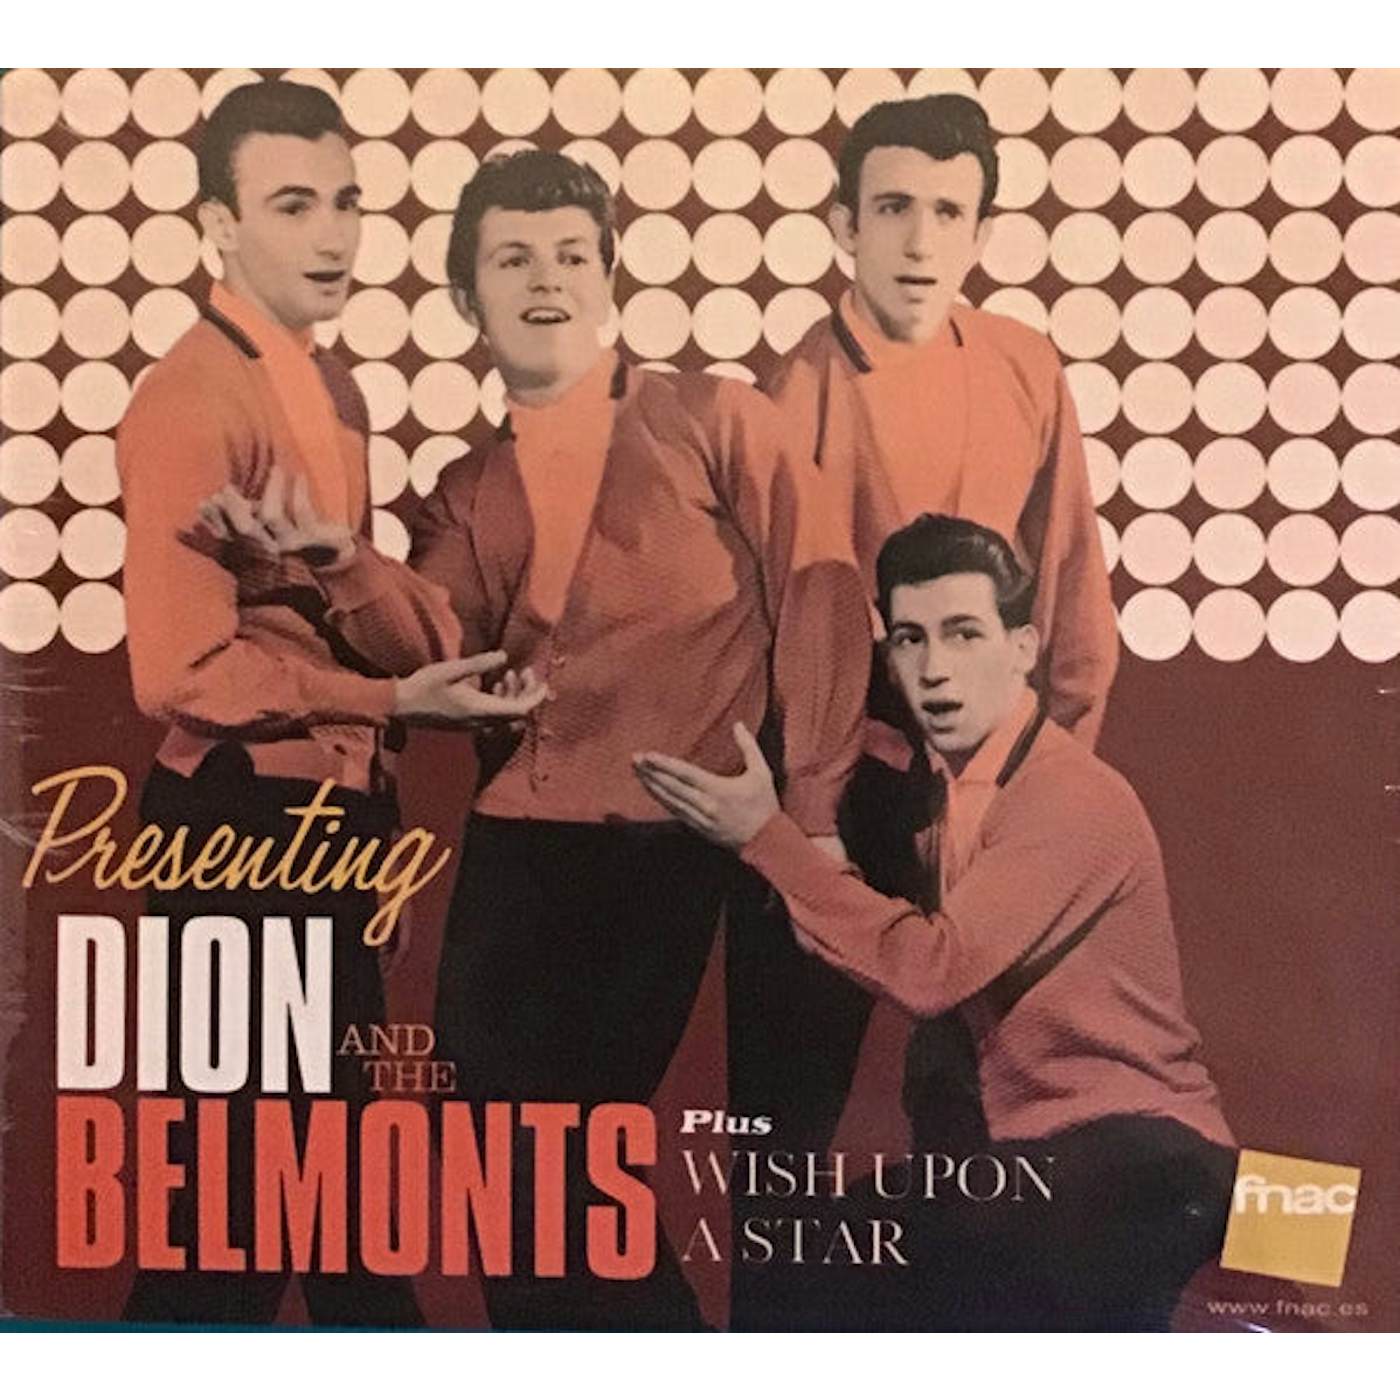 Dion & The Belmonts CD - Presenting Dion And The Belmonts + Wish Upon A ...